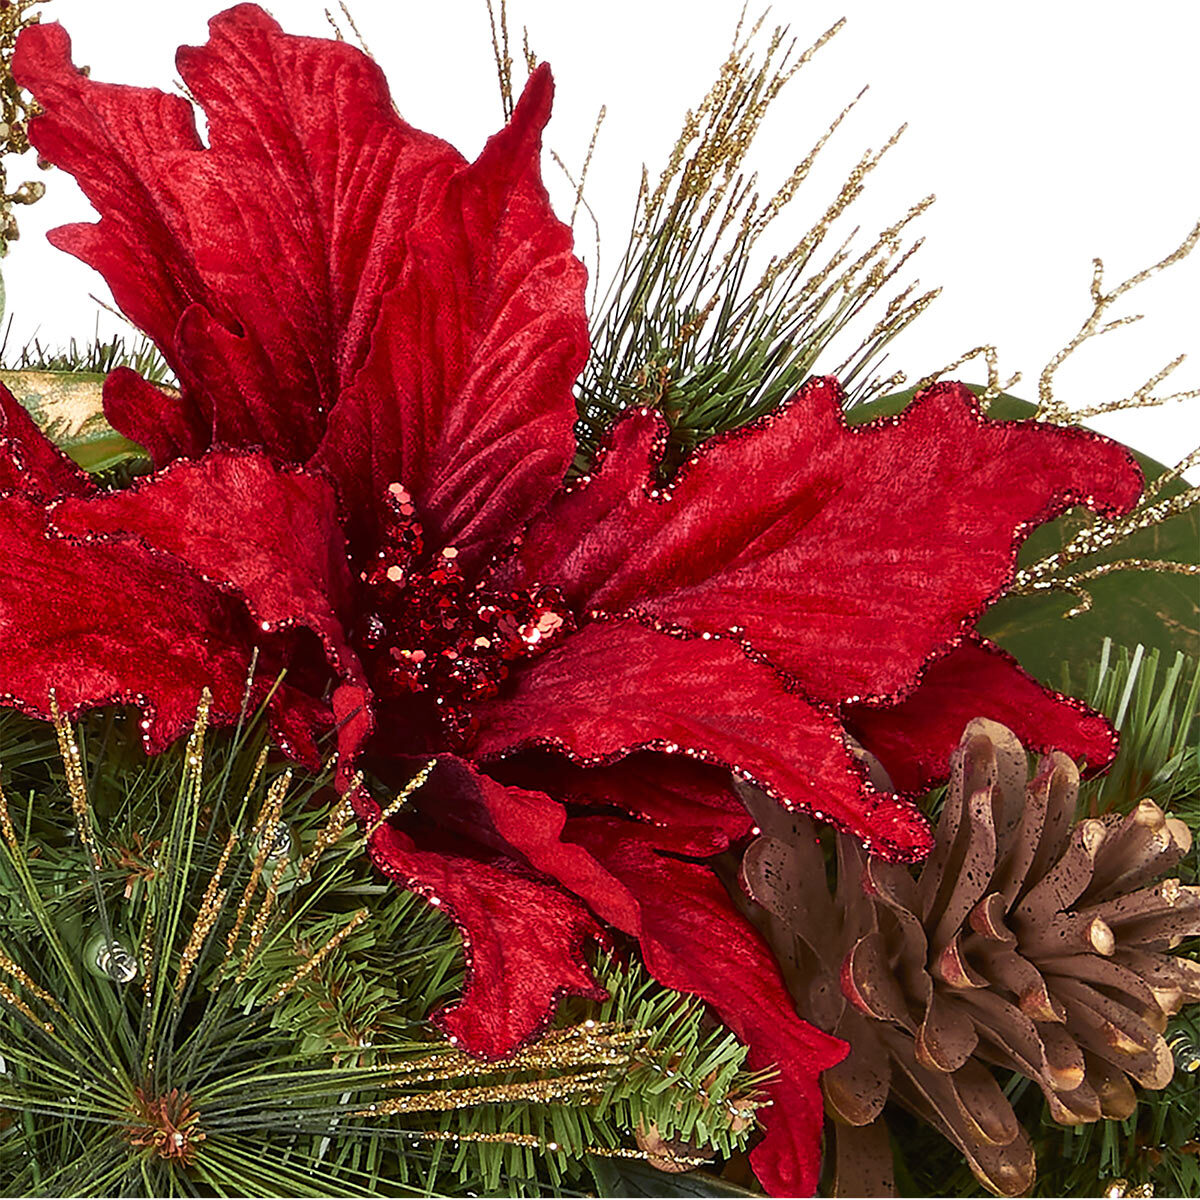 Buy 32" Pre-Lit Decorative Centrepiece Red Close Up Image at Costco.co.uk